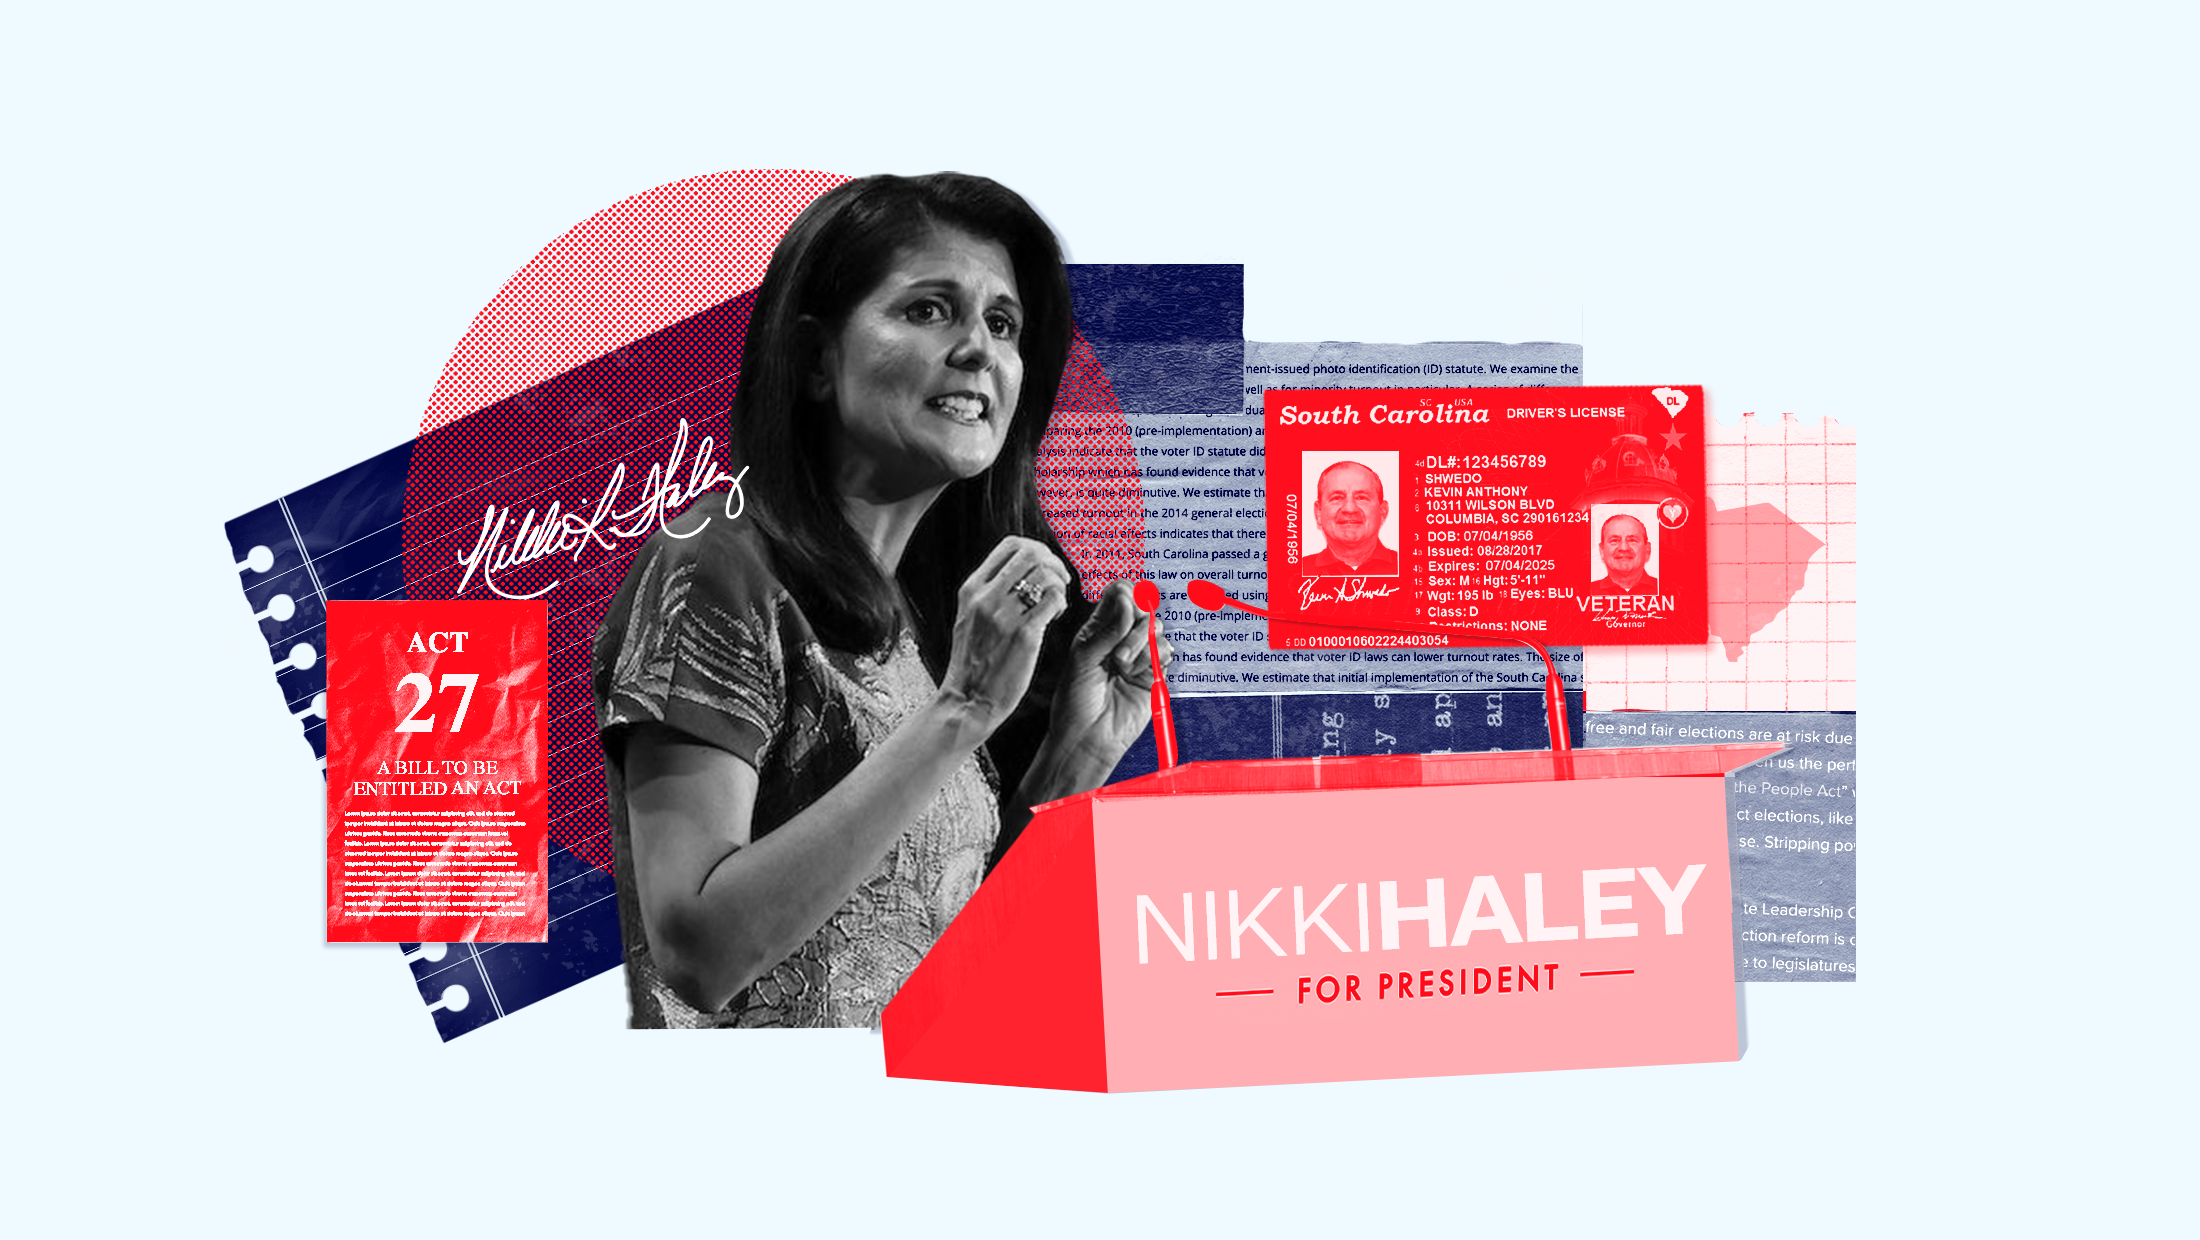 Nikki Haley standing before a podium that says "Nikki Haley for President" surrounded by cut out images of her signature, bill text of Act 17, a South Carolina drivers license and other text cutouts.